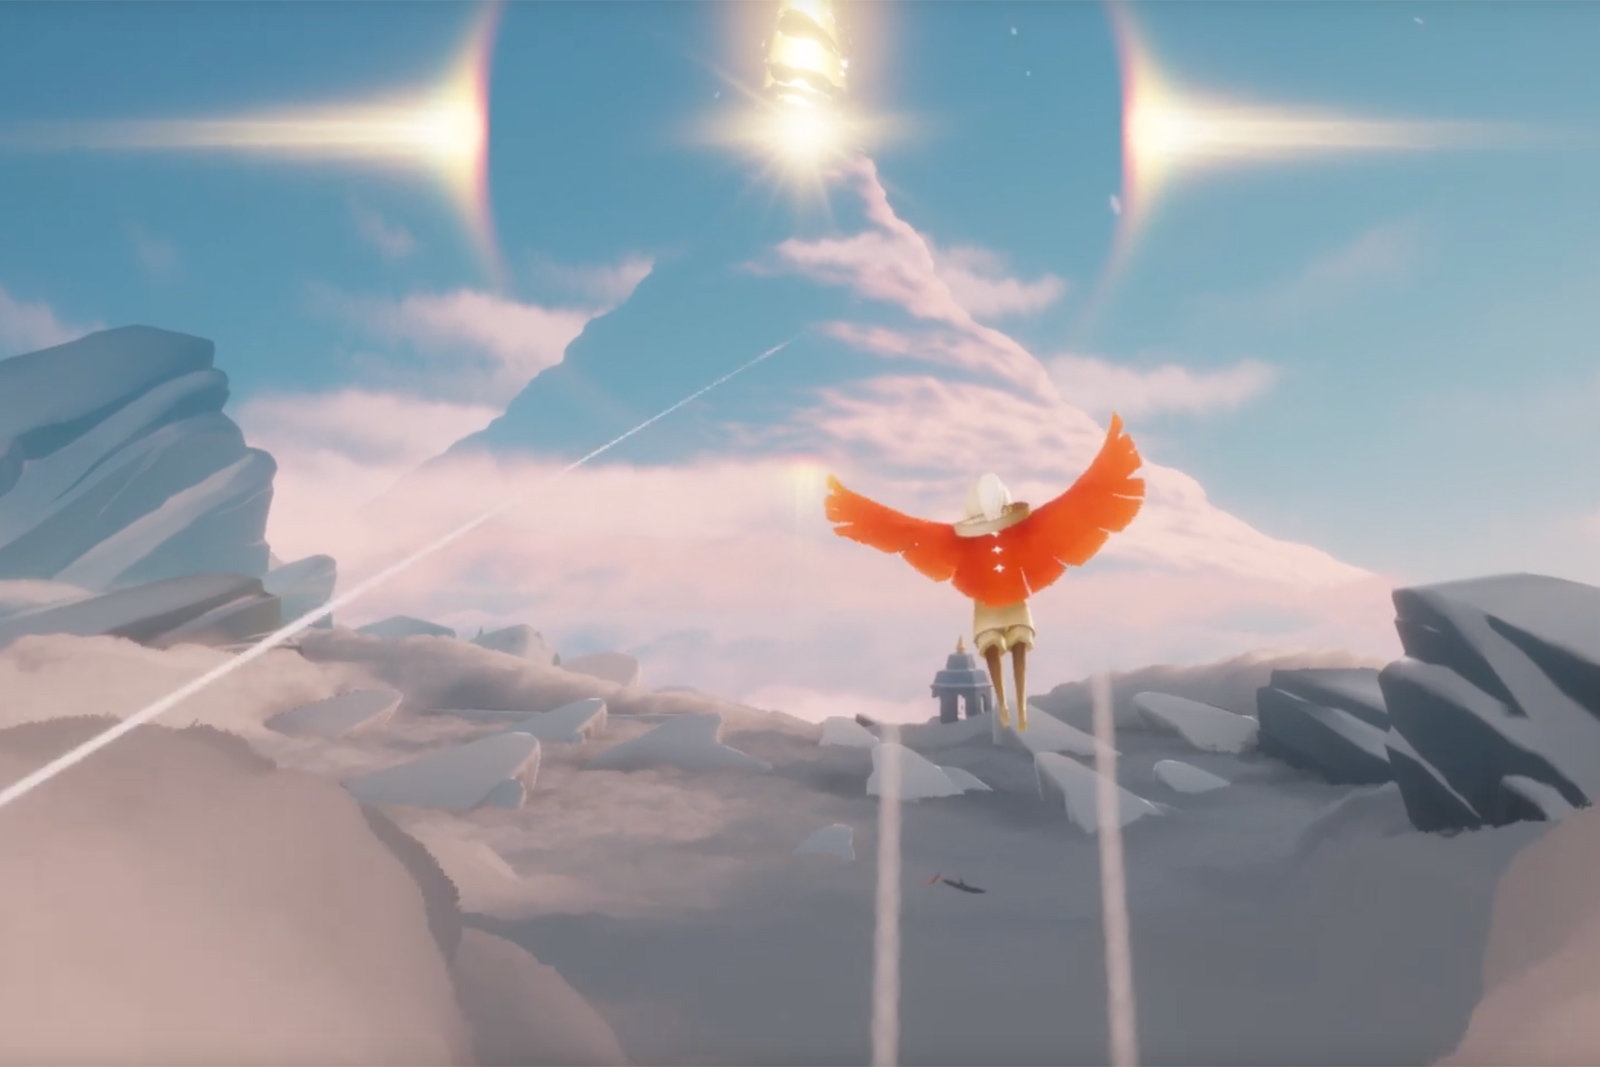 'Journey' creator's Apple-exclusive 'Sky' officially launches July 11th | DeviceDaily.com